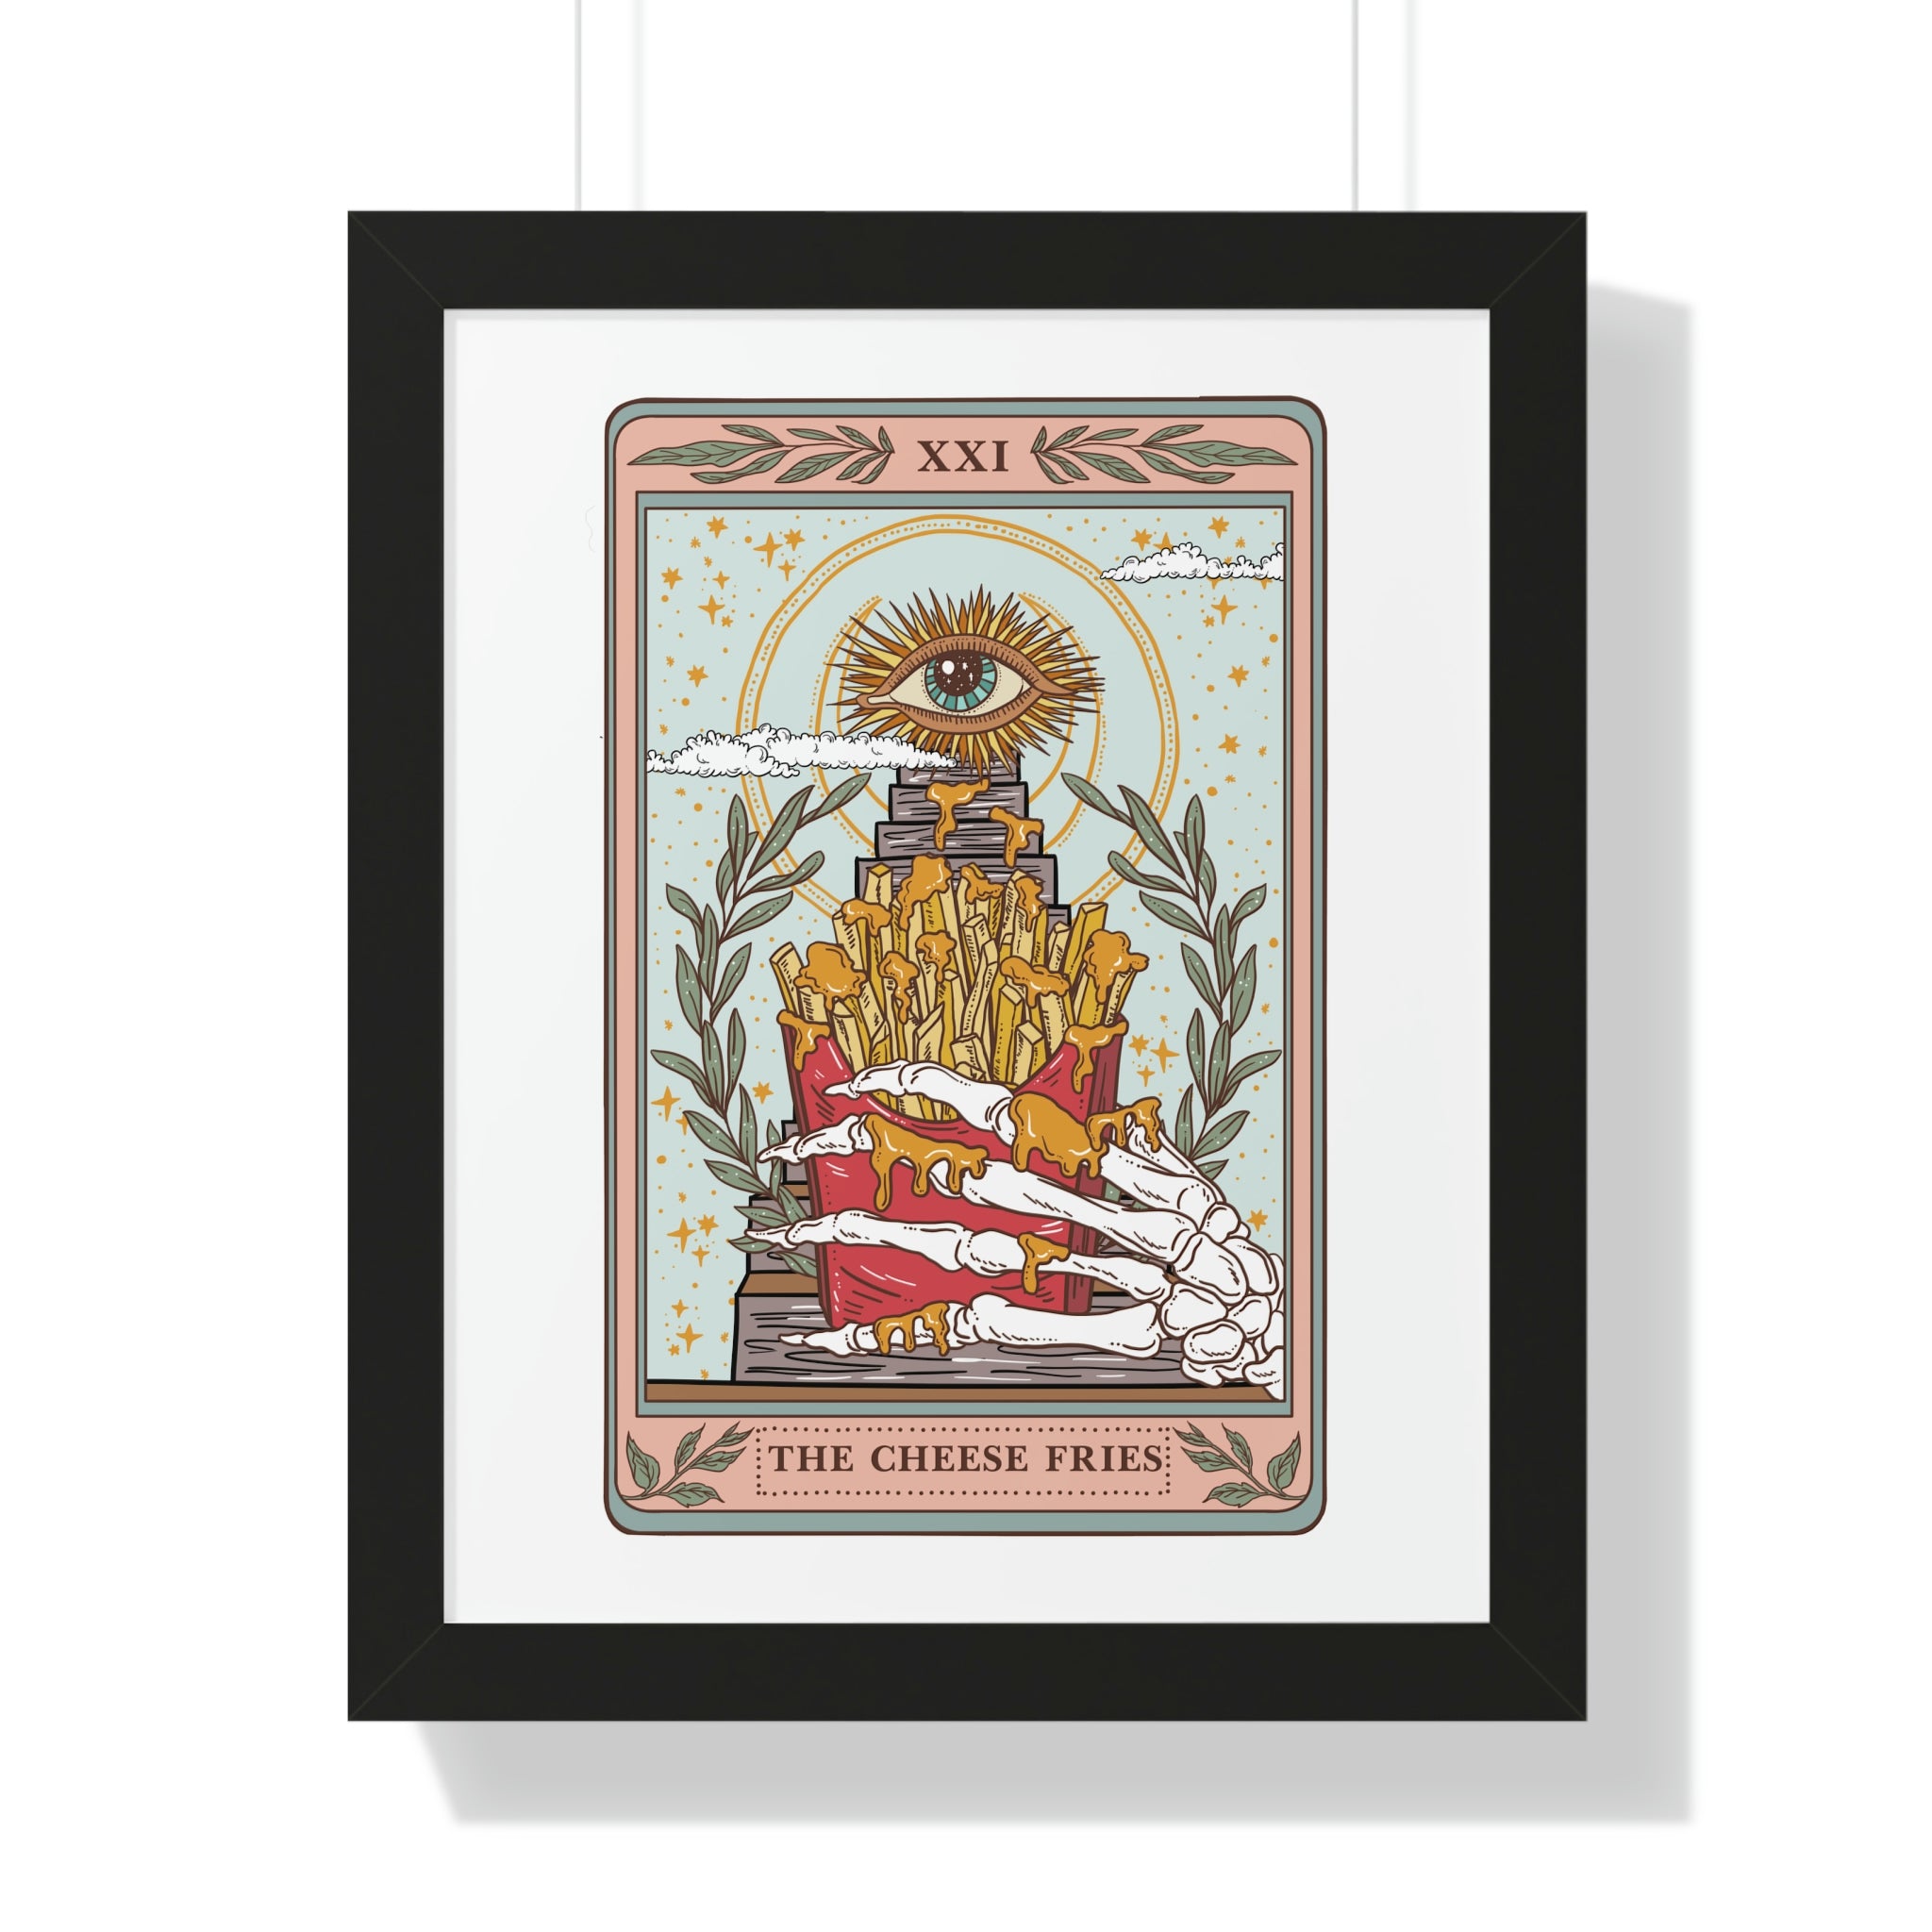 THE CHEESE FRIES // FRAMED POSTER PRINT